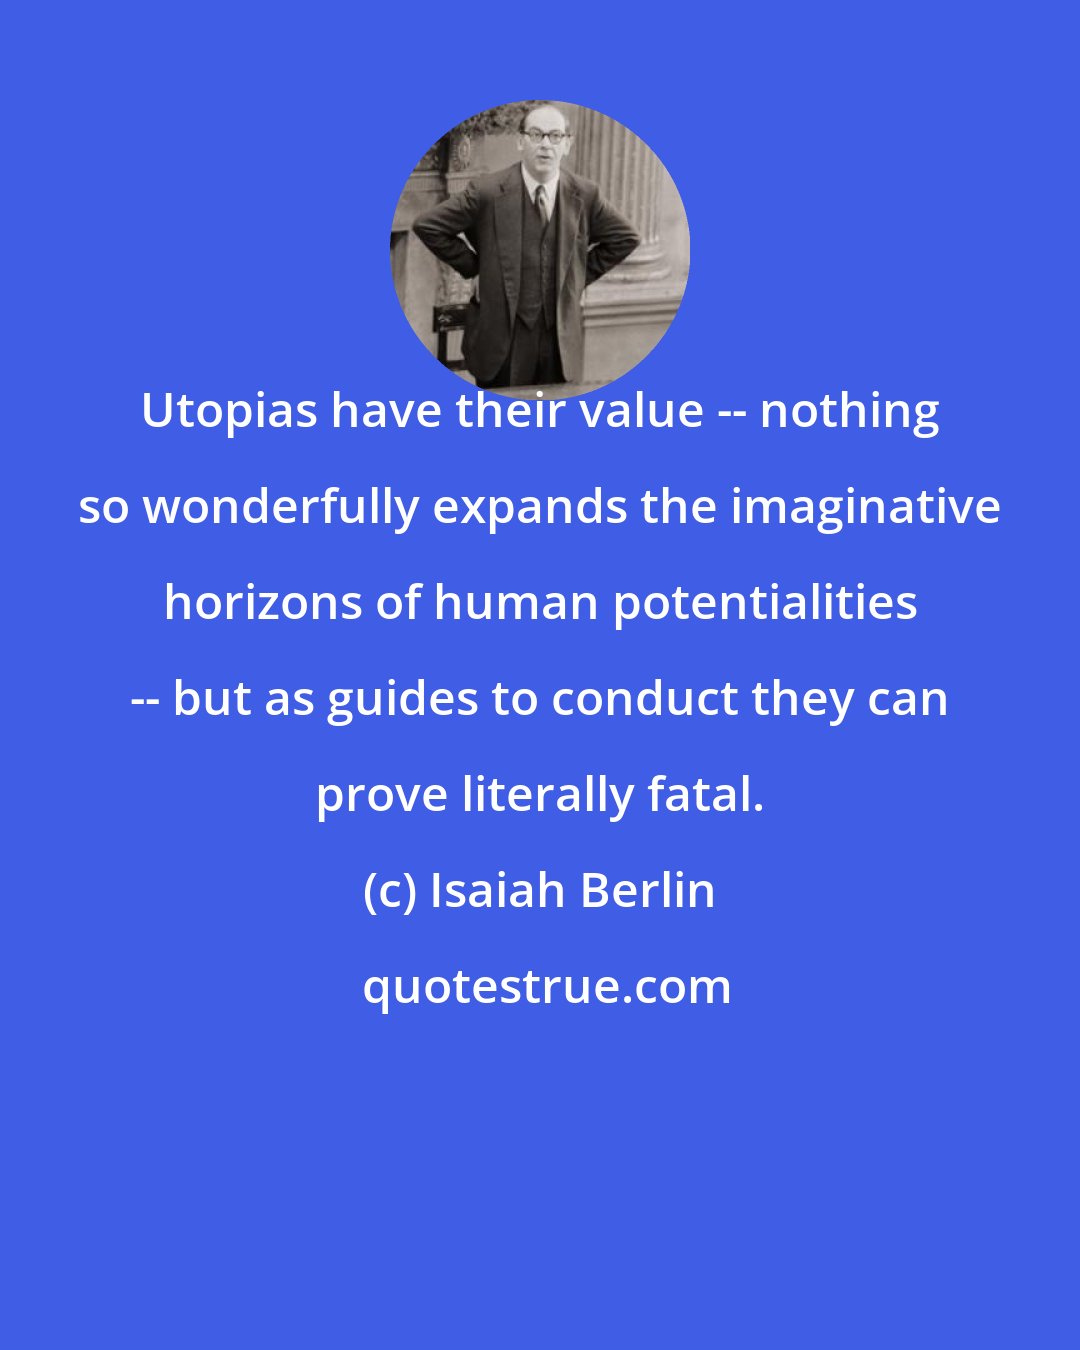 Isaiah Berlin: Utopias have their value -- nothing so wonderfully expands the imaginative horizons of human potentialities -- but as guides to conduct they can prove literally fatal.